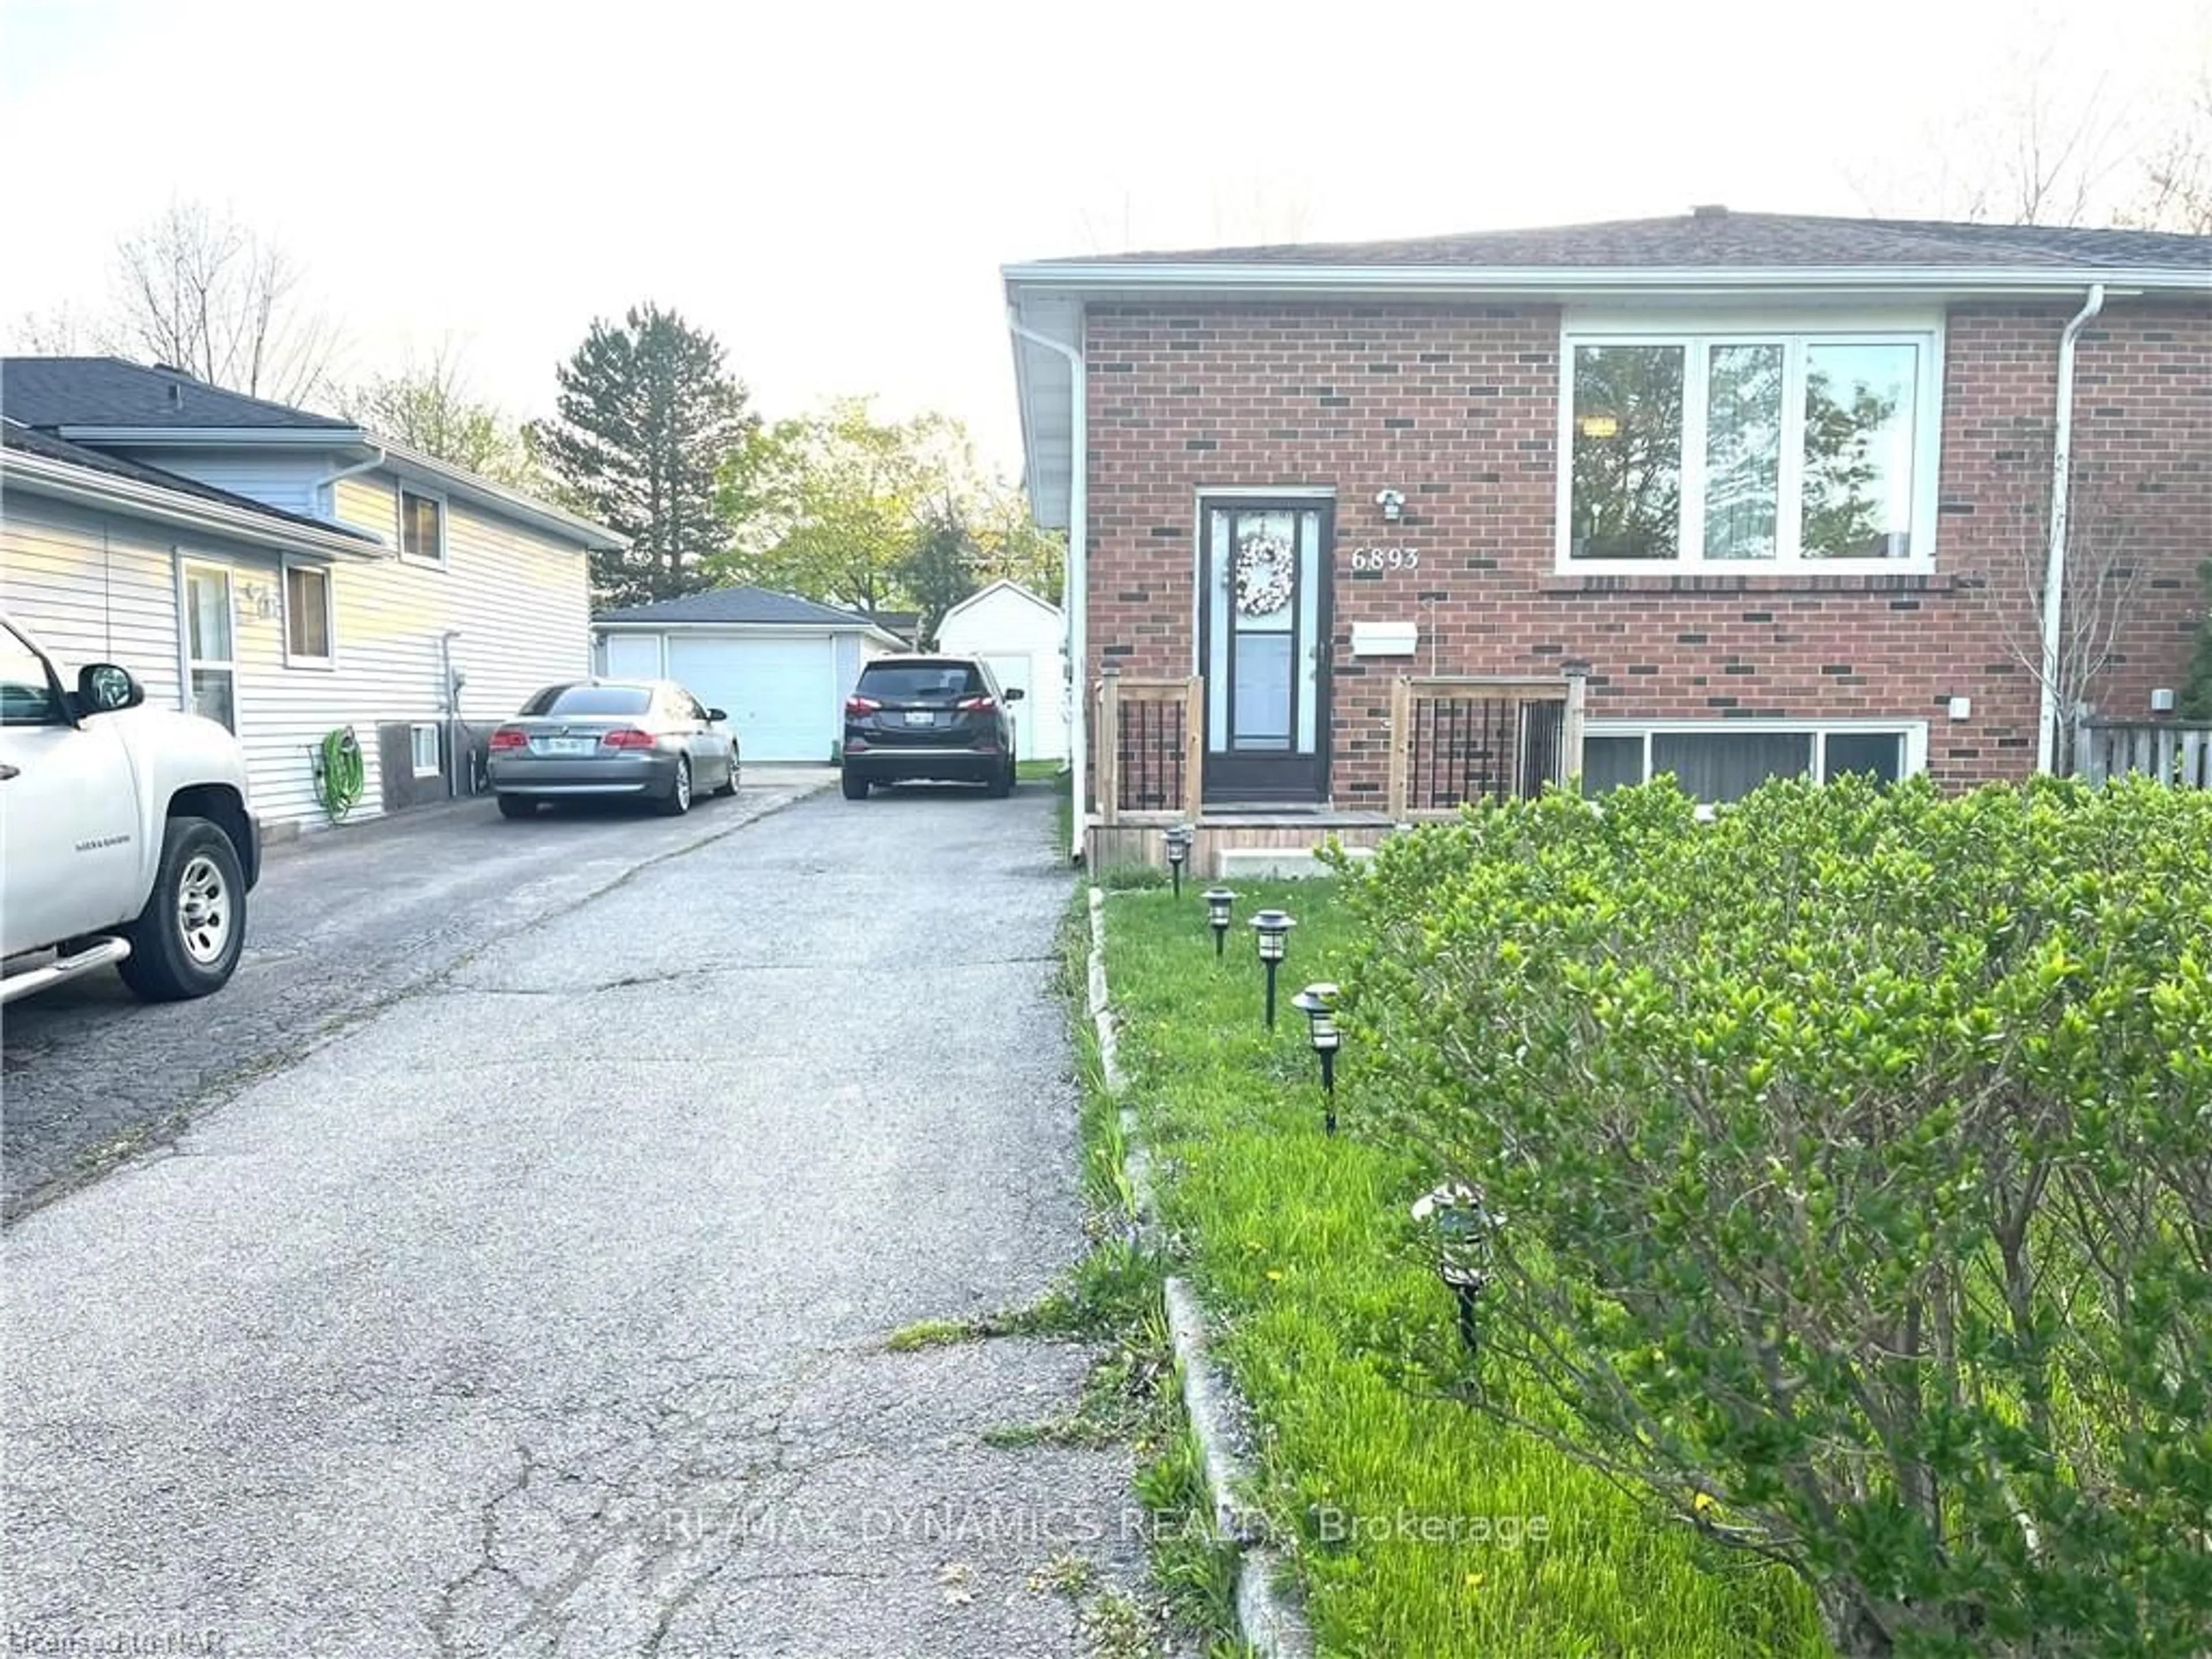 Frontside or backside of a home for 6893 Warden Ave, Niagara Falls Ontario L2G 5P4